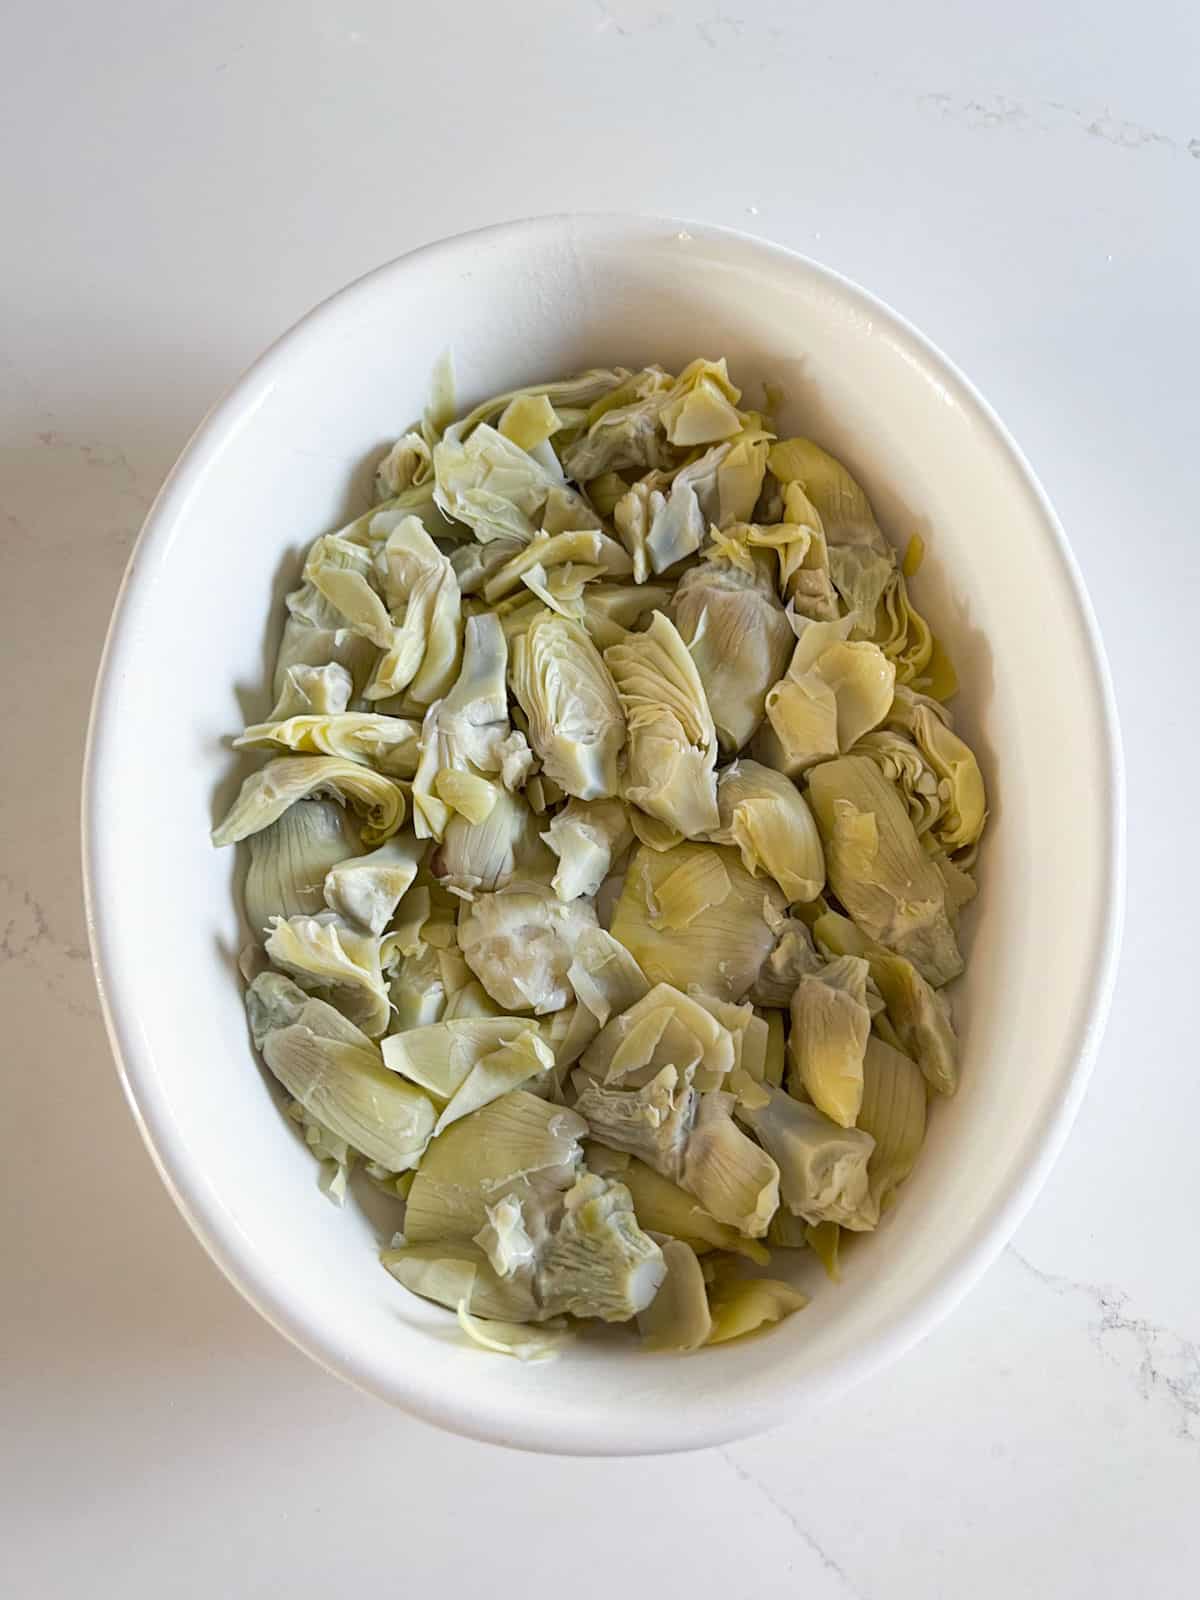 A layer of artichokes in a white baking dish.